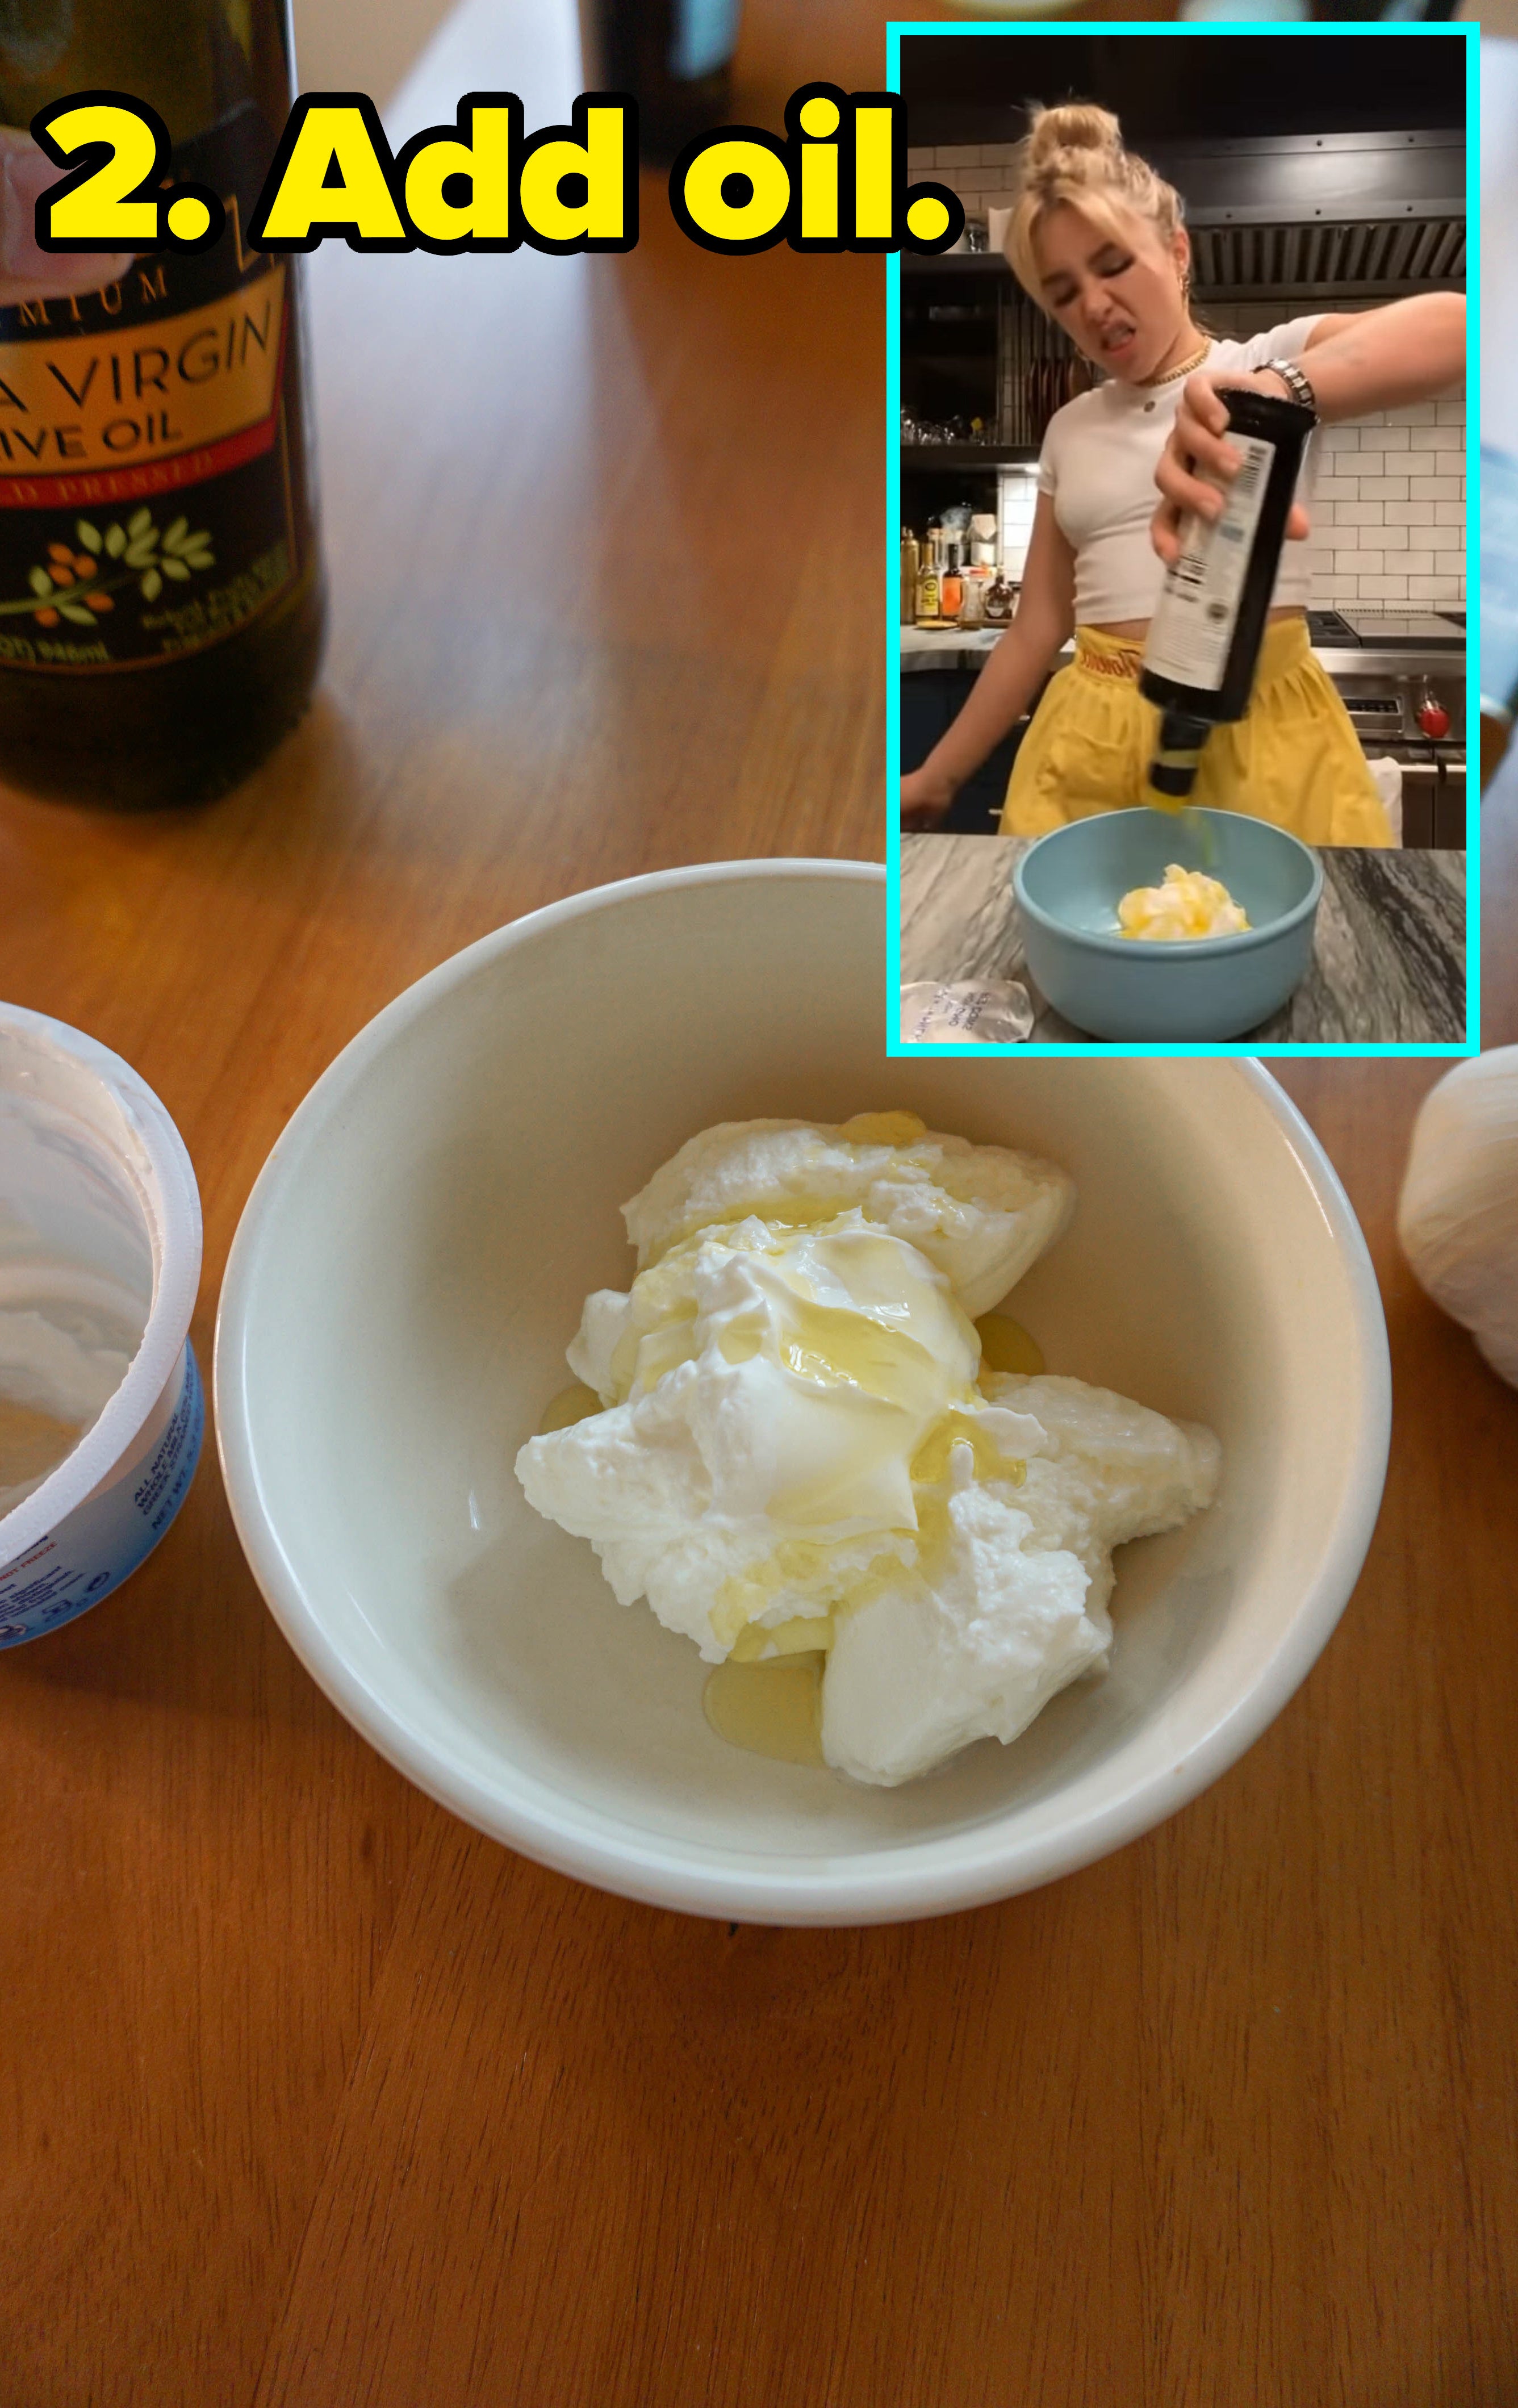 yogurt with olive oil next to a picture of Florence Pugh pouring oil in her yogurt